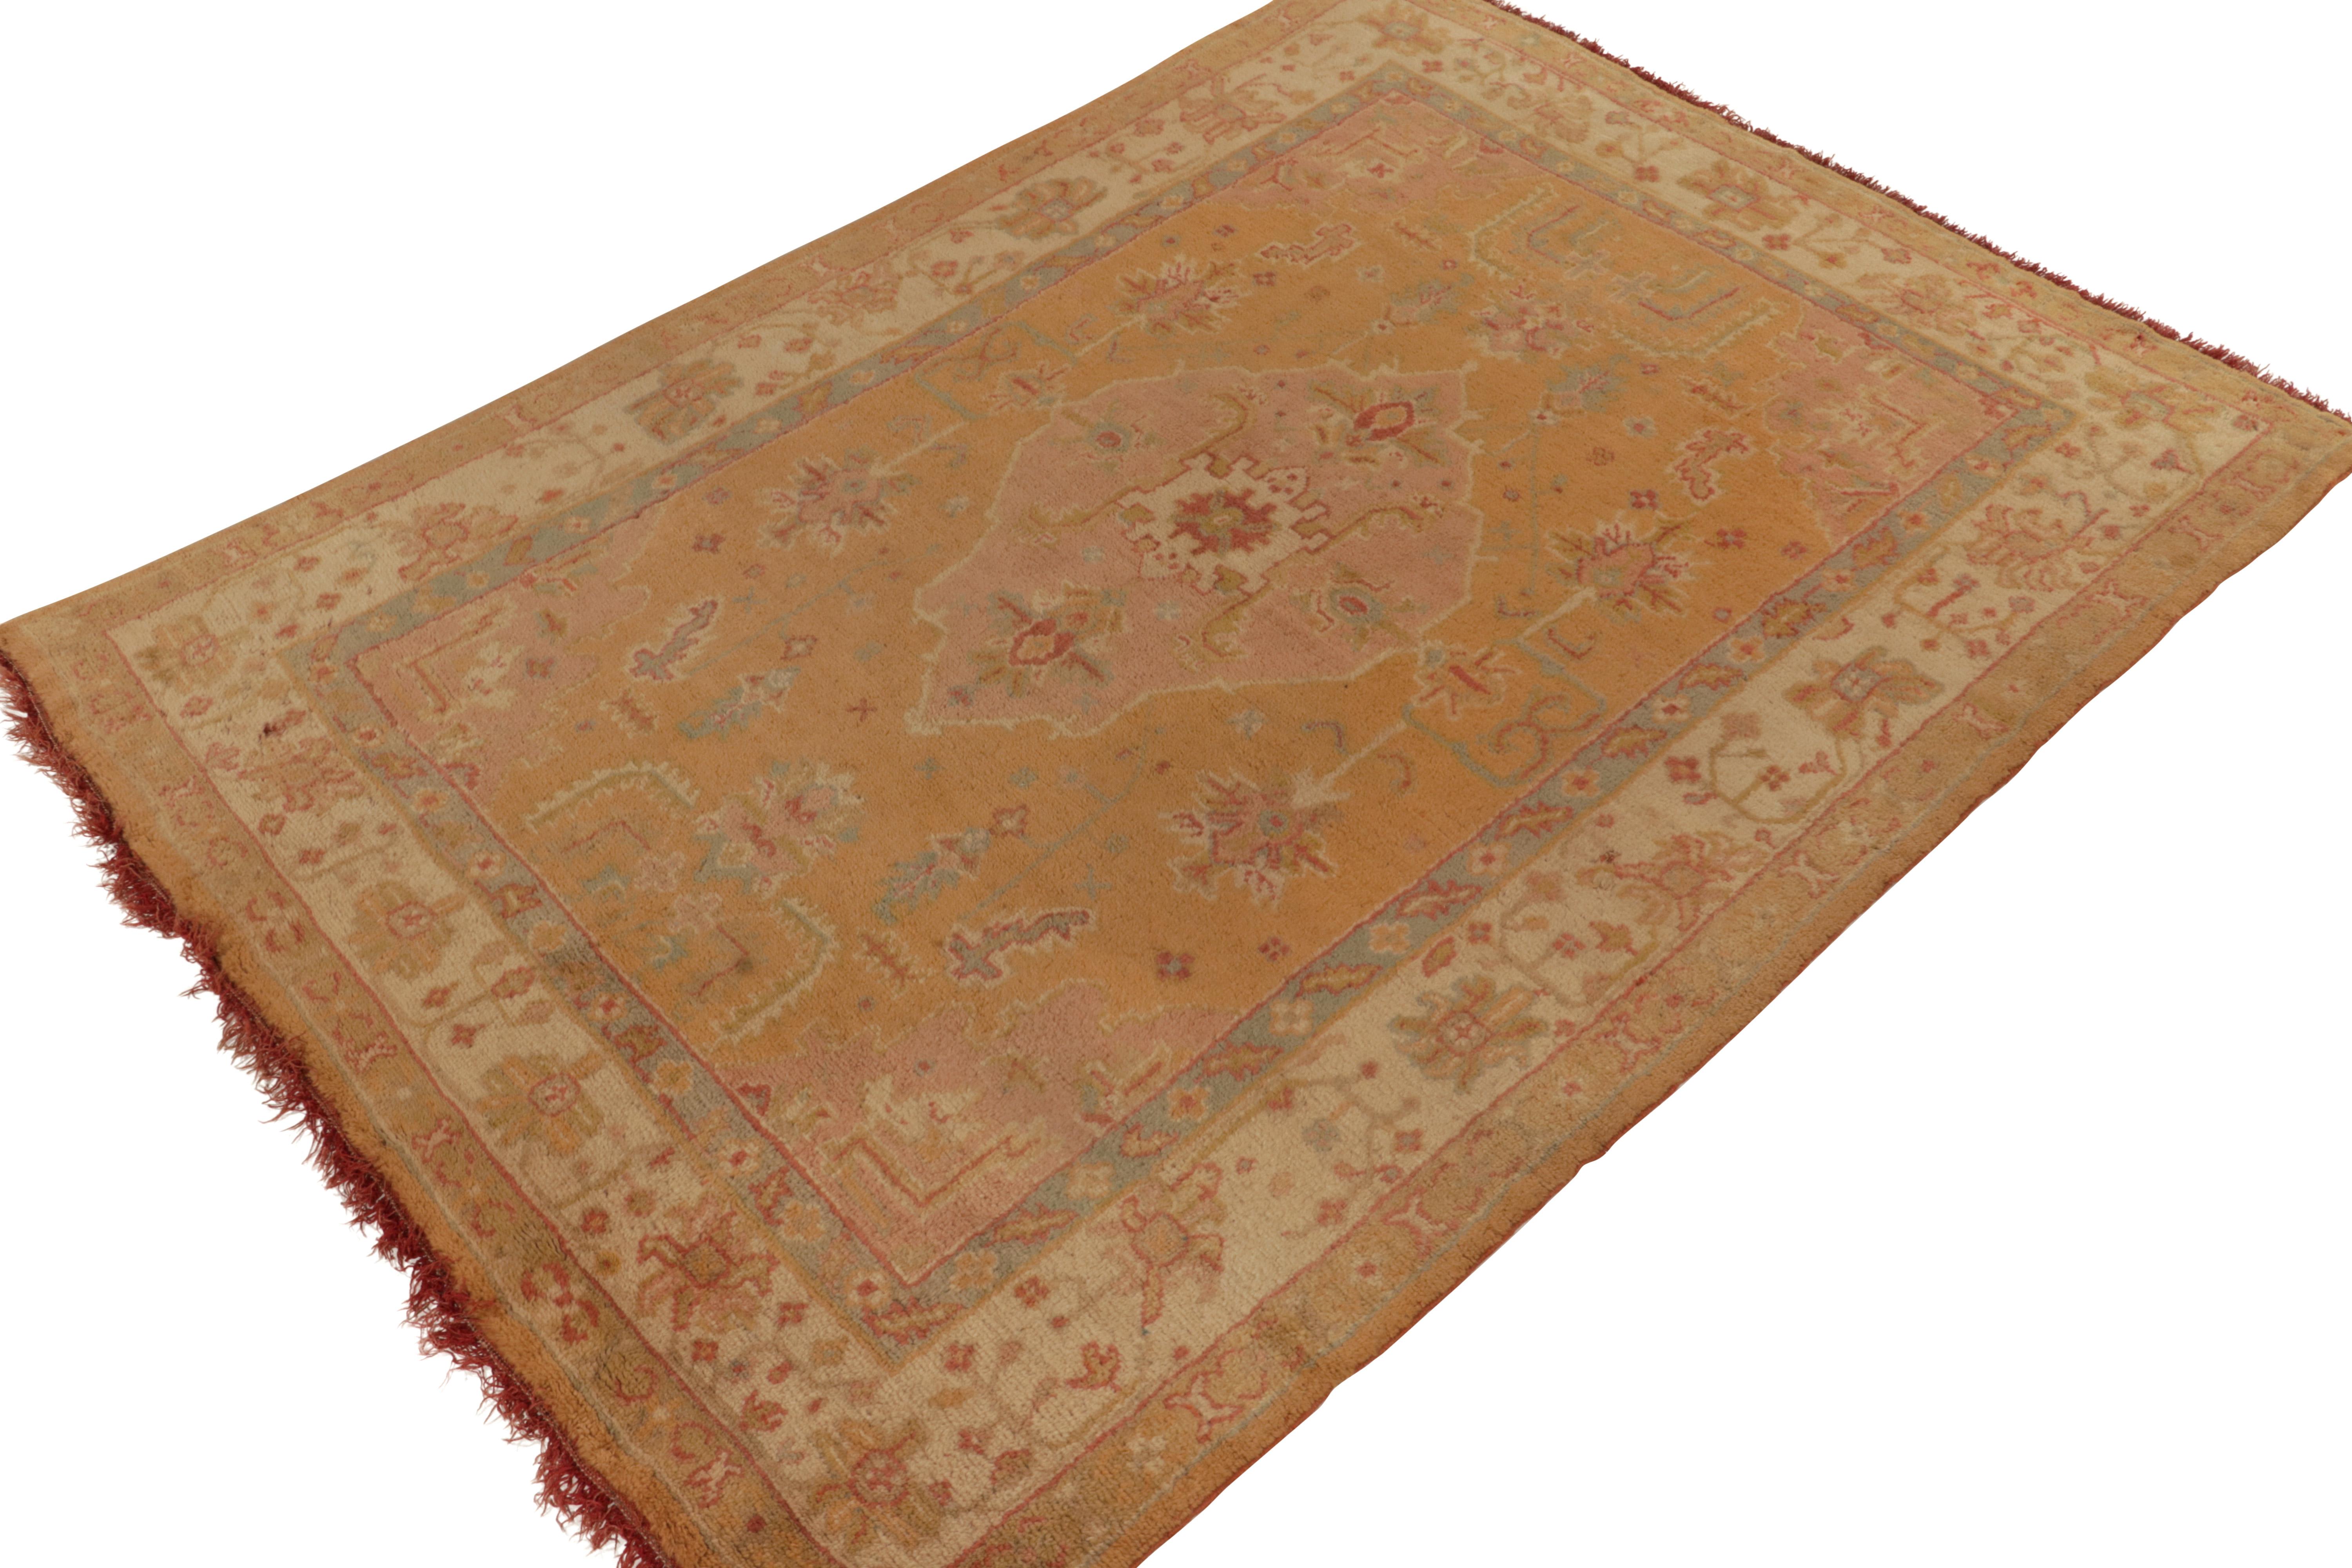 Hand-knotted in wool circa 1920-1930, an 8x11 antique Oushak rug among the personal favorite classic curations of Josh Nazmiyal. 

Taking after one of the most coveted Turkish styles for these comfortable and regal designs, this masterpiece